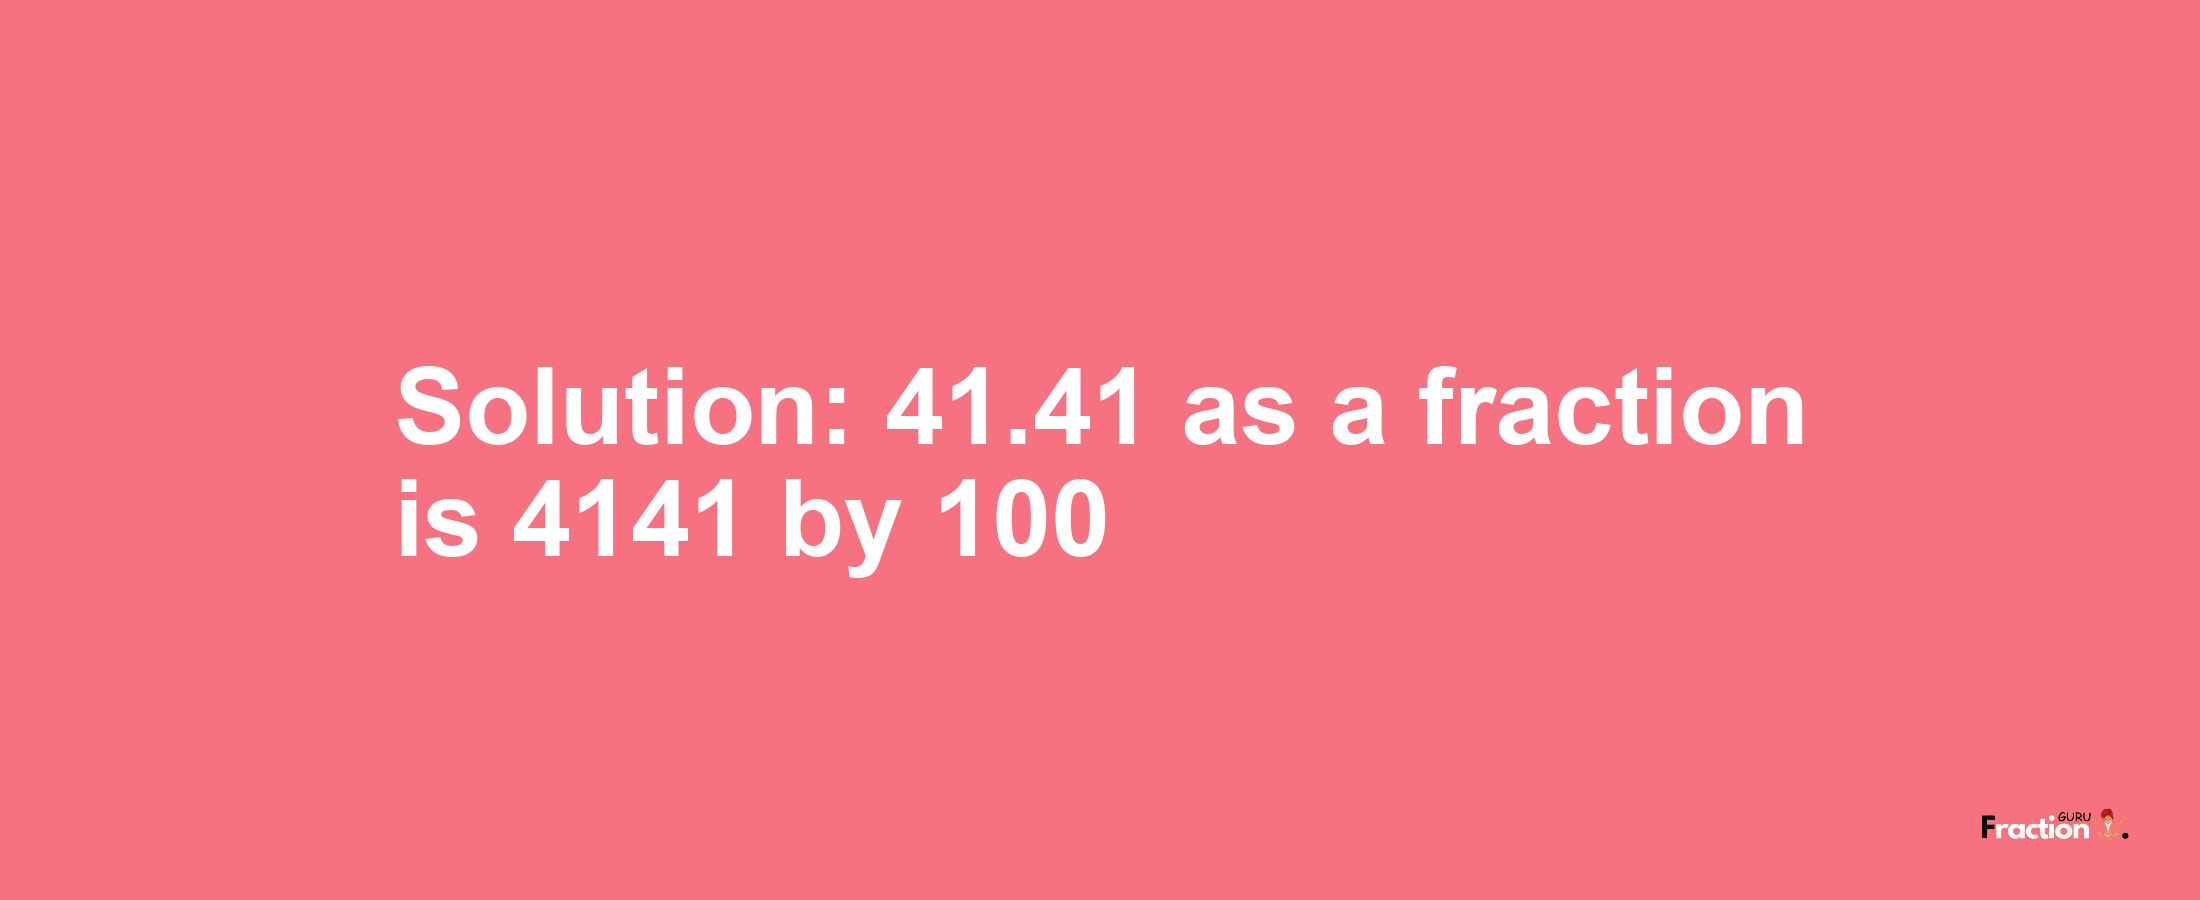 Solution:41.41 as a fraction is 4141/100